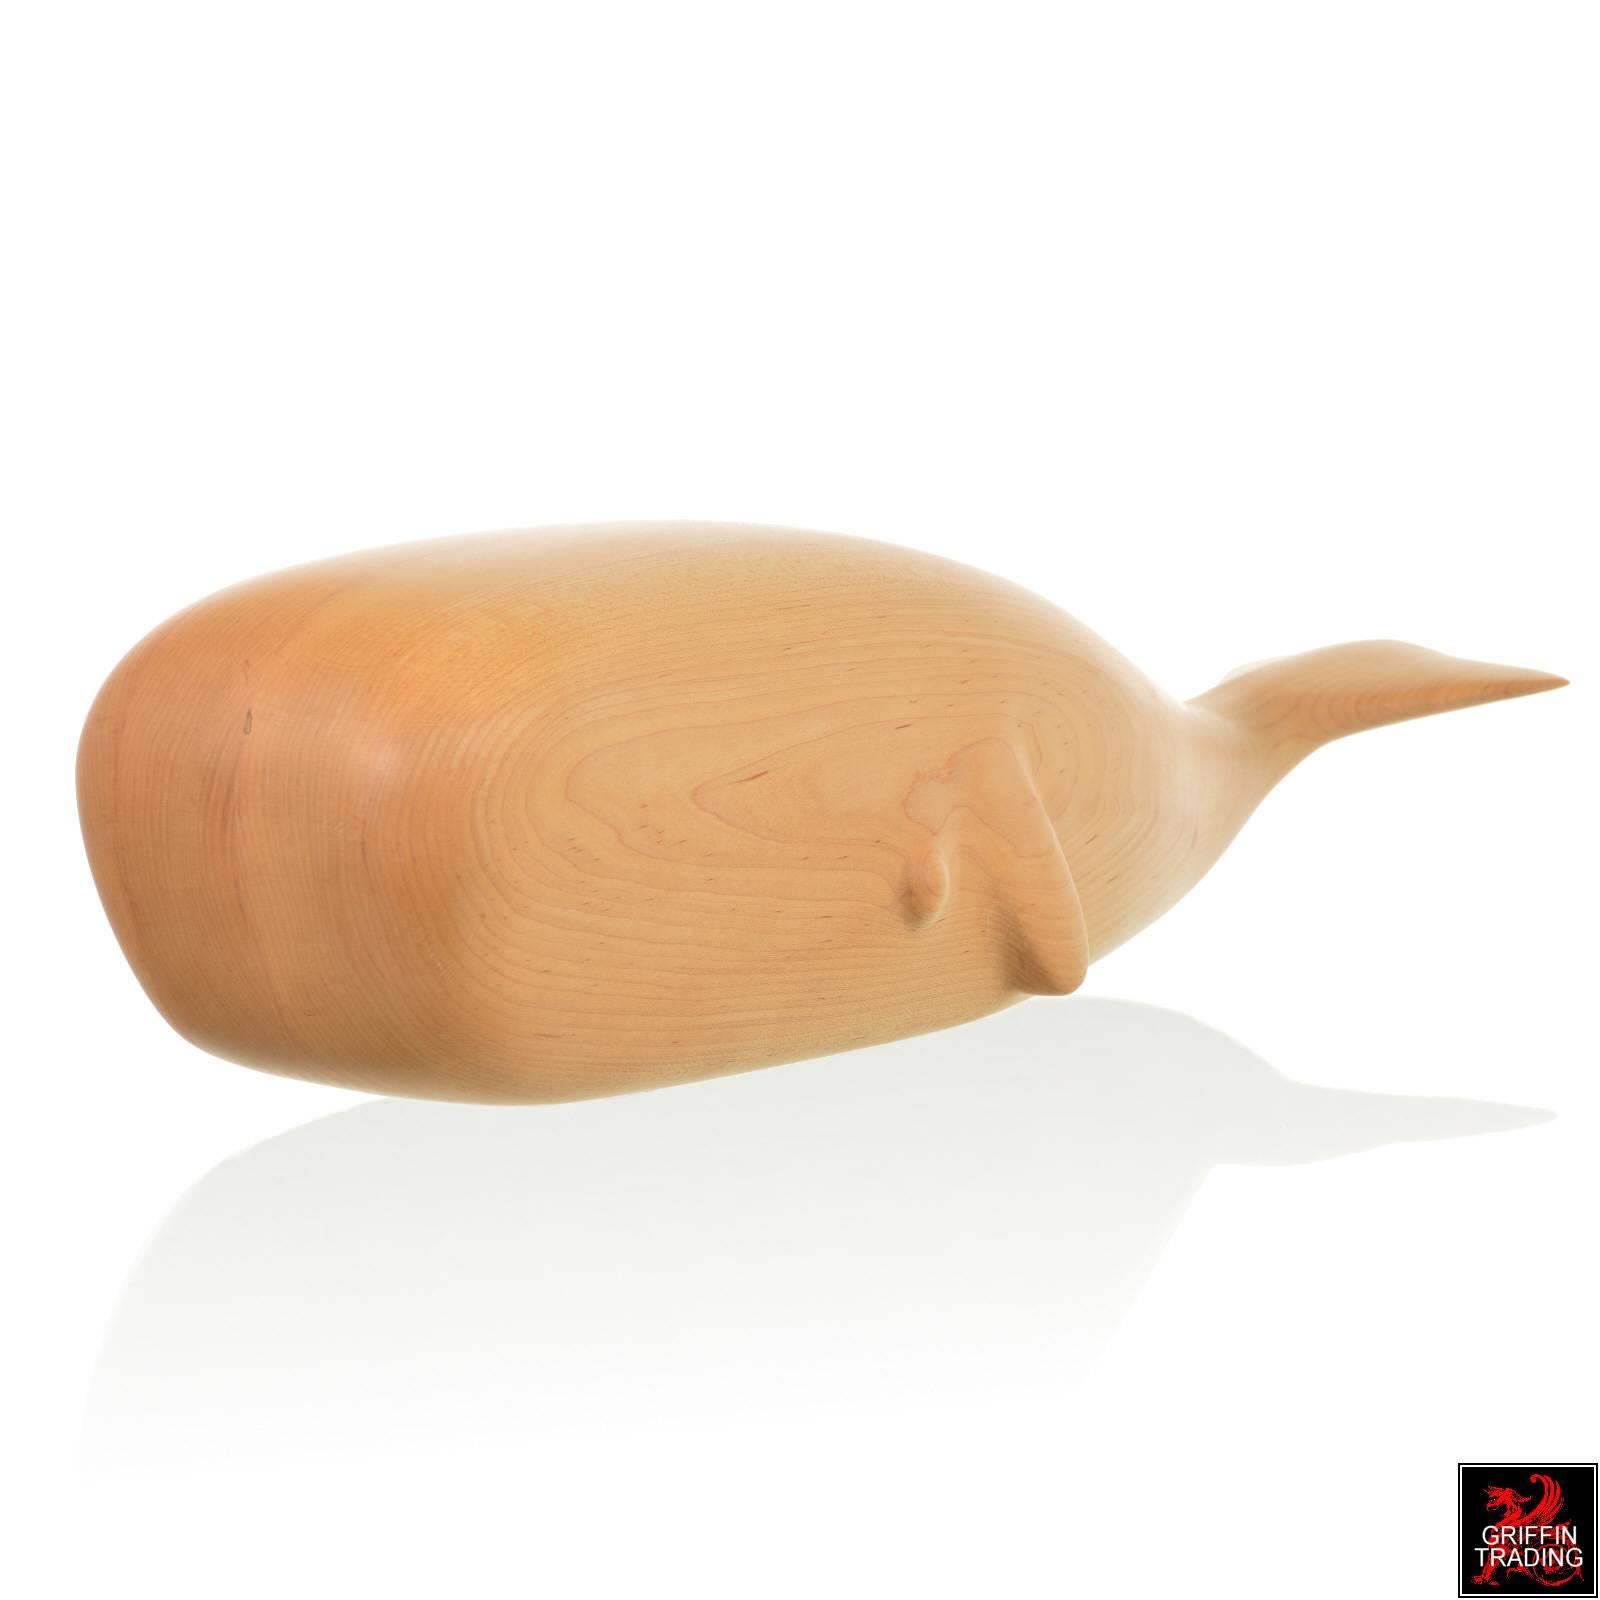 This charming white Whale wood sculpture is the beautiful work of artist and sculptor David Robin Hoyt. The charming design and subtle detail were all hand shaped by the artist. This is a solid sculpture made of layers of thick wood joined together